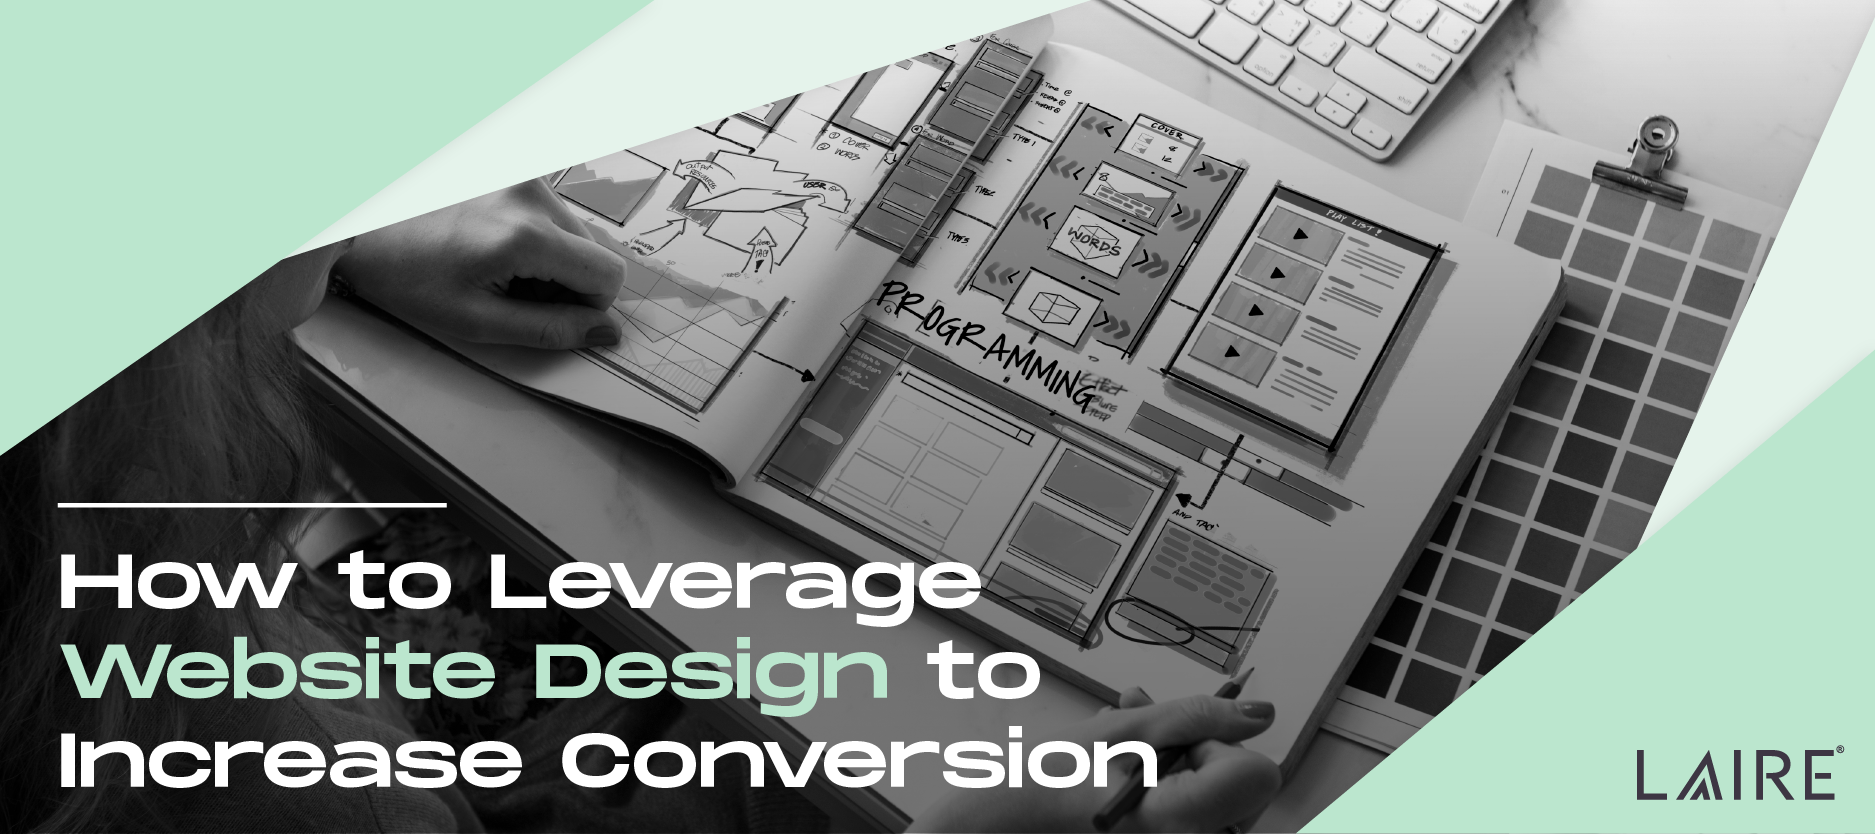 How to Leverage Website Design to Increase Conversion